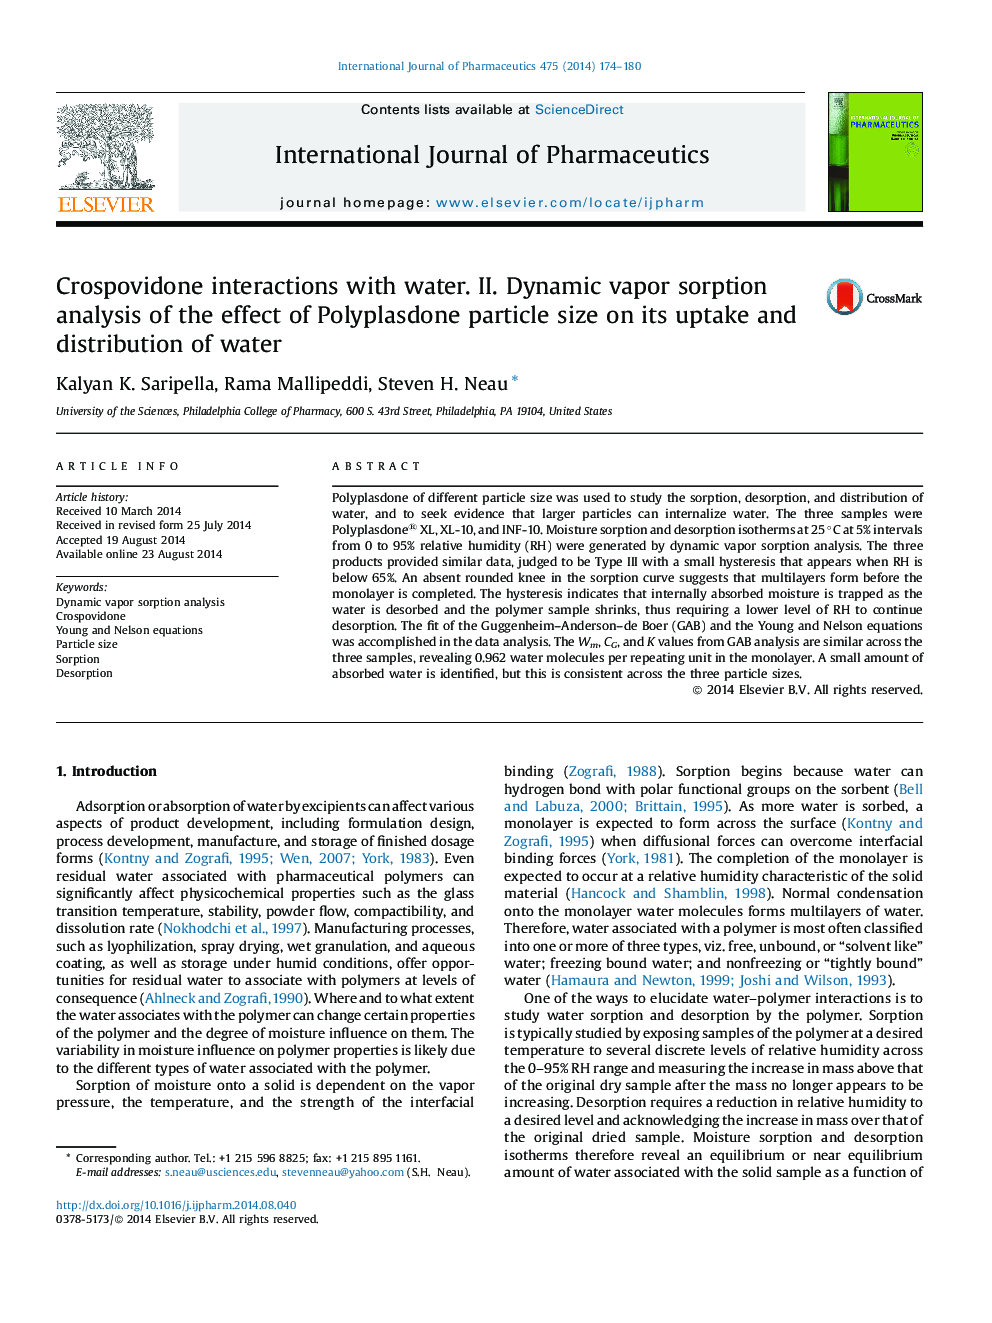 Crospovidone interactions with water. II. Dynamic vapor sorption analysis of the effect of Polyplasdone particle size on its uptake and distribution of water